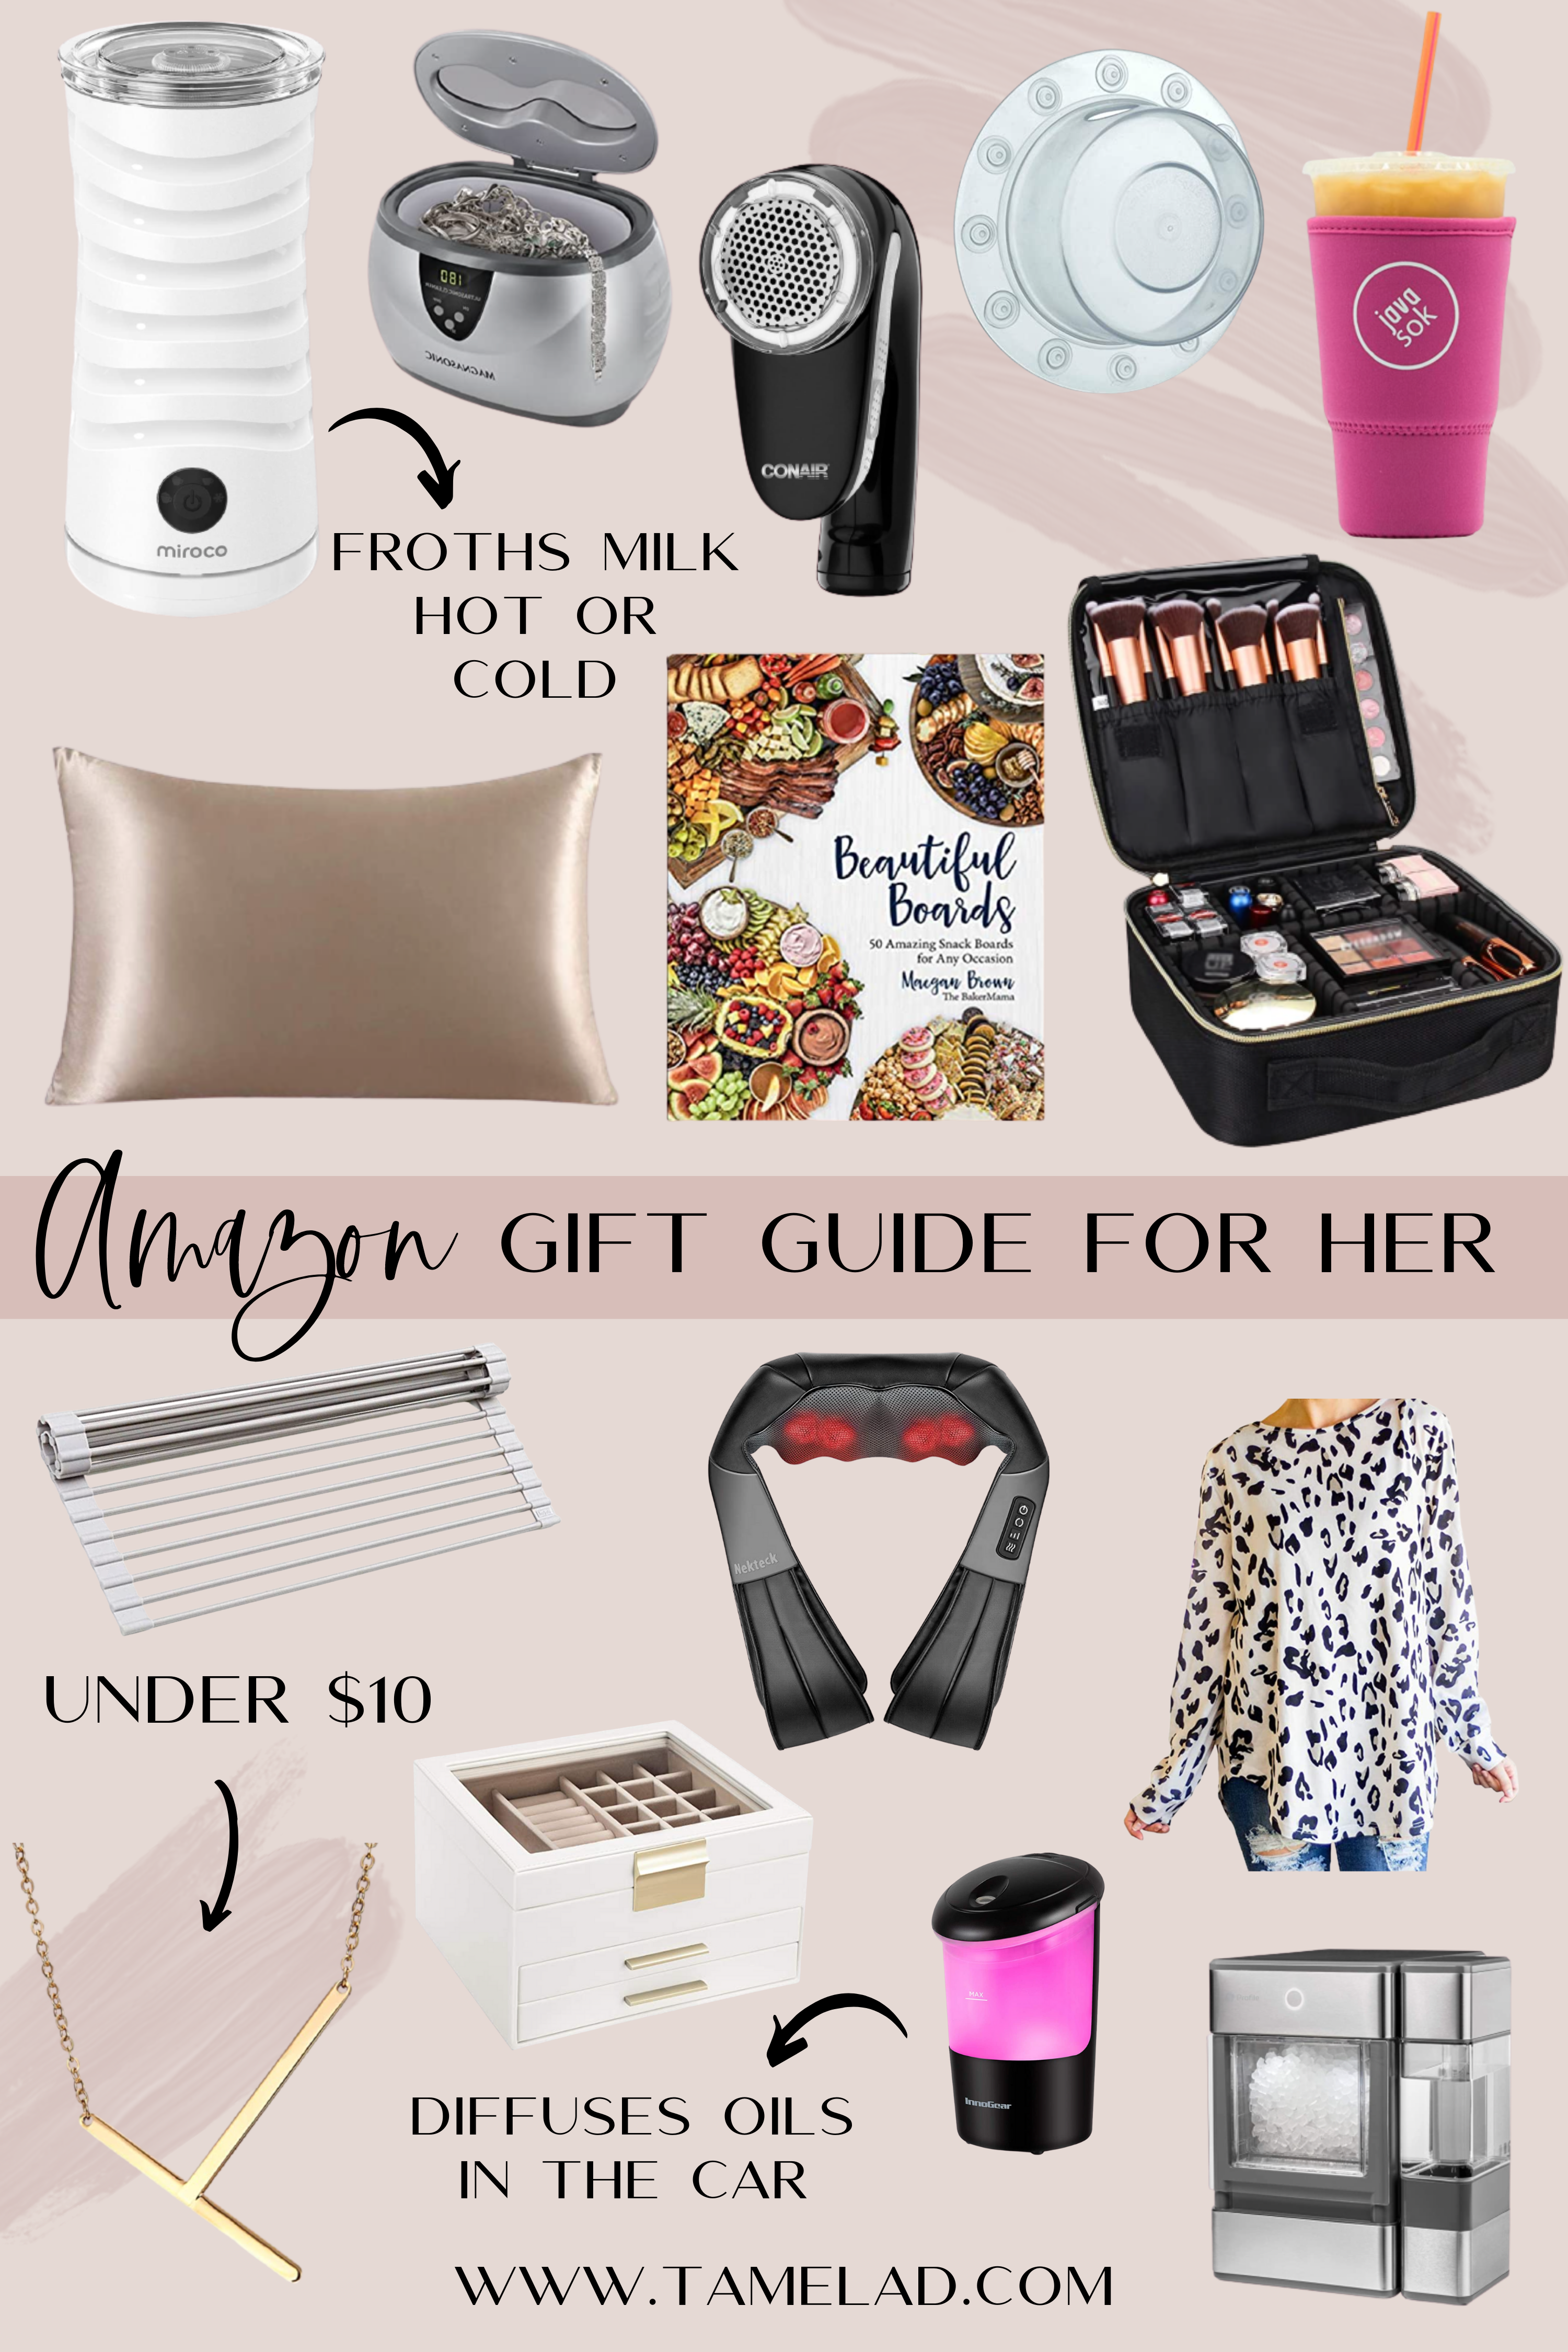 The Best Gifts For Her From Amazon in 2022